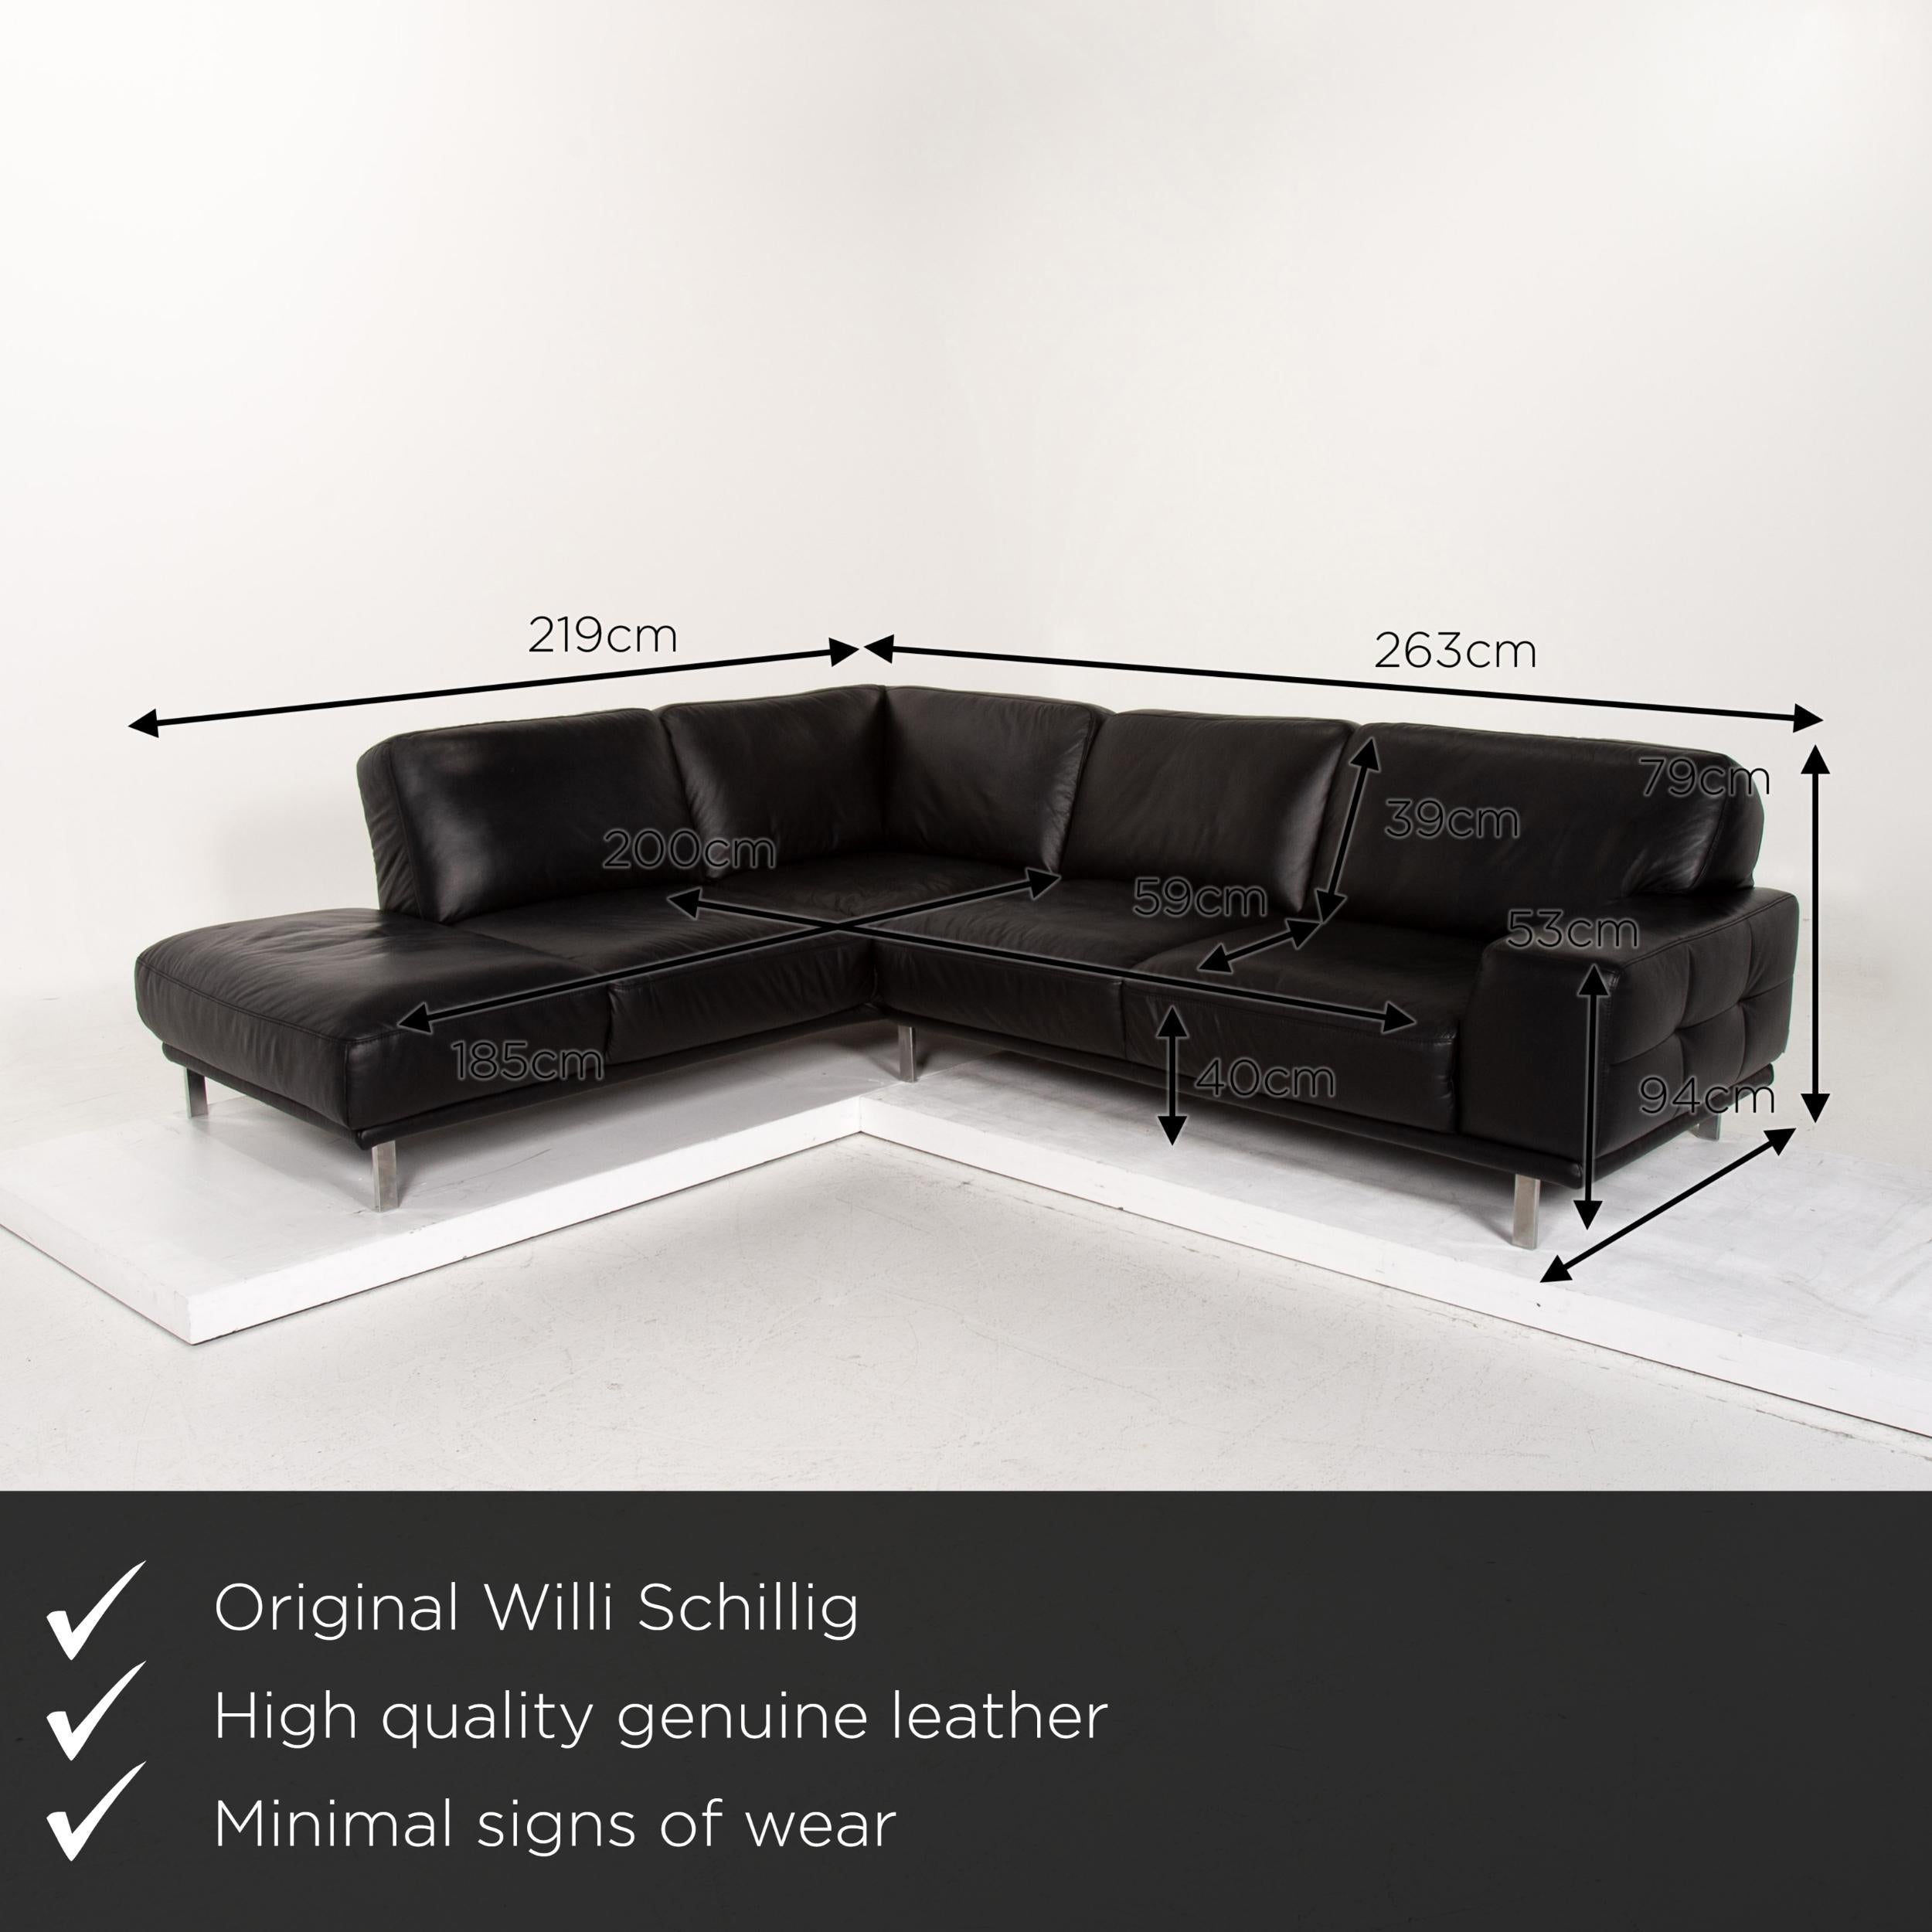 We present to you a Willi Schillig leather corner sofa black sofa couch.
 

 Product measurements in centimeters:
 

Depth 94
Width 219
Height 79
Seat height 40
Rest height 53
Seat depth 59
Seat width 185
Back height 39.
 